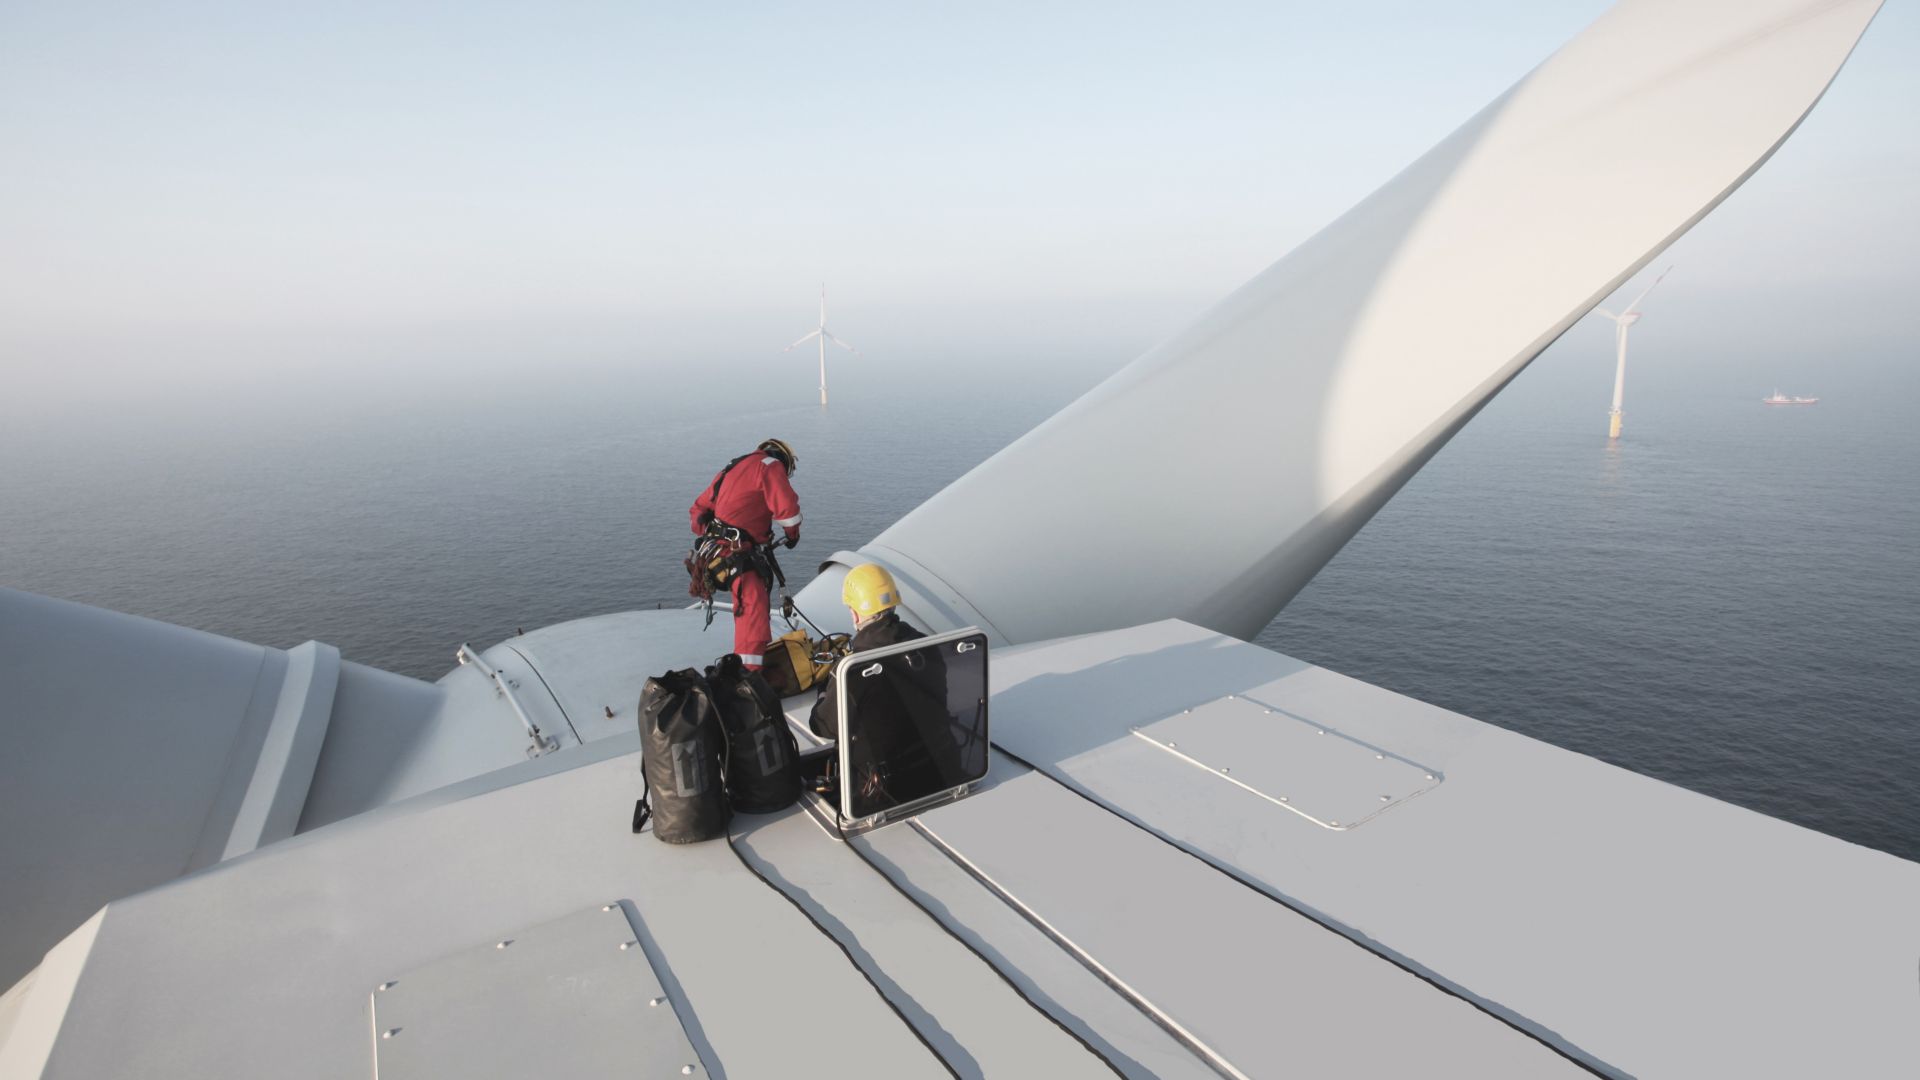 Products for Wind Turbine Repair and Maintenance | Sika